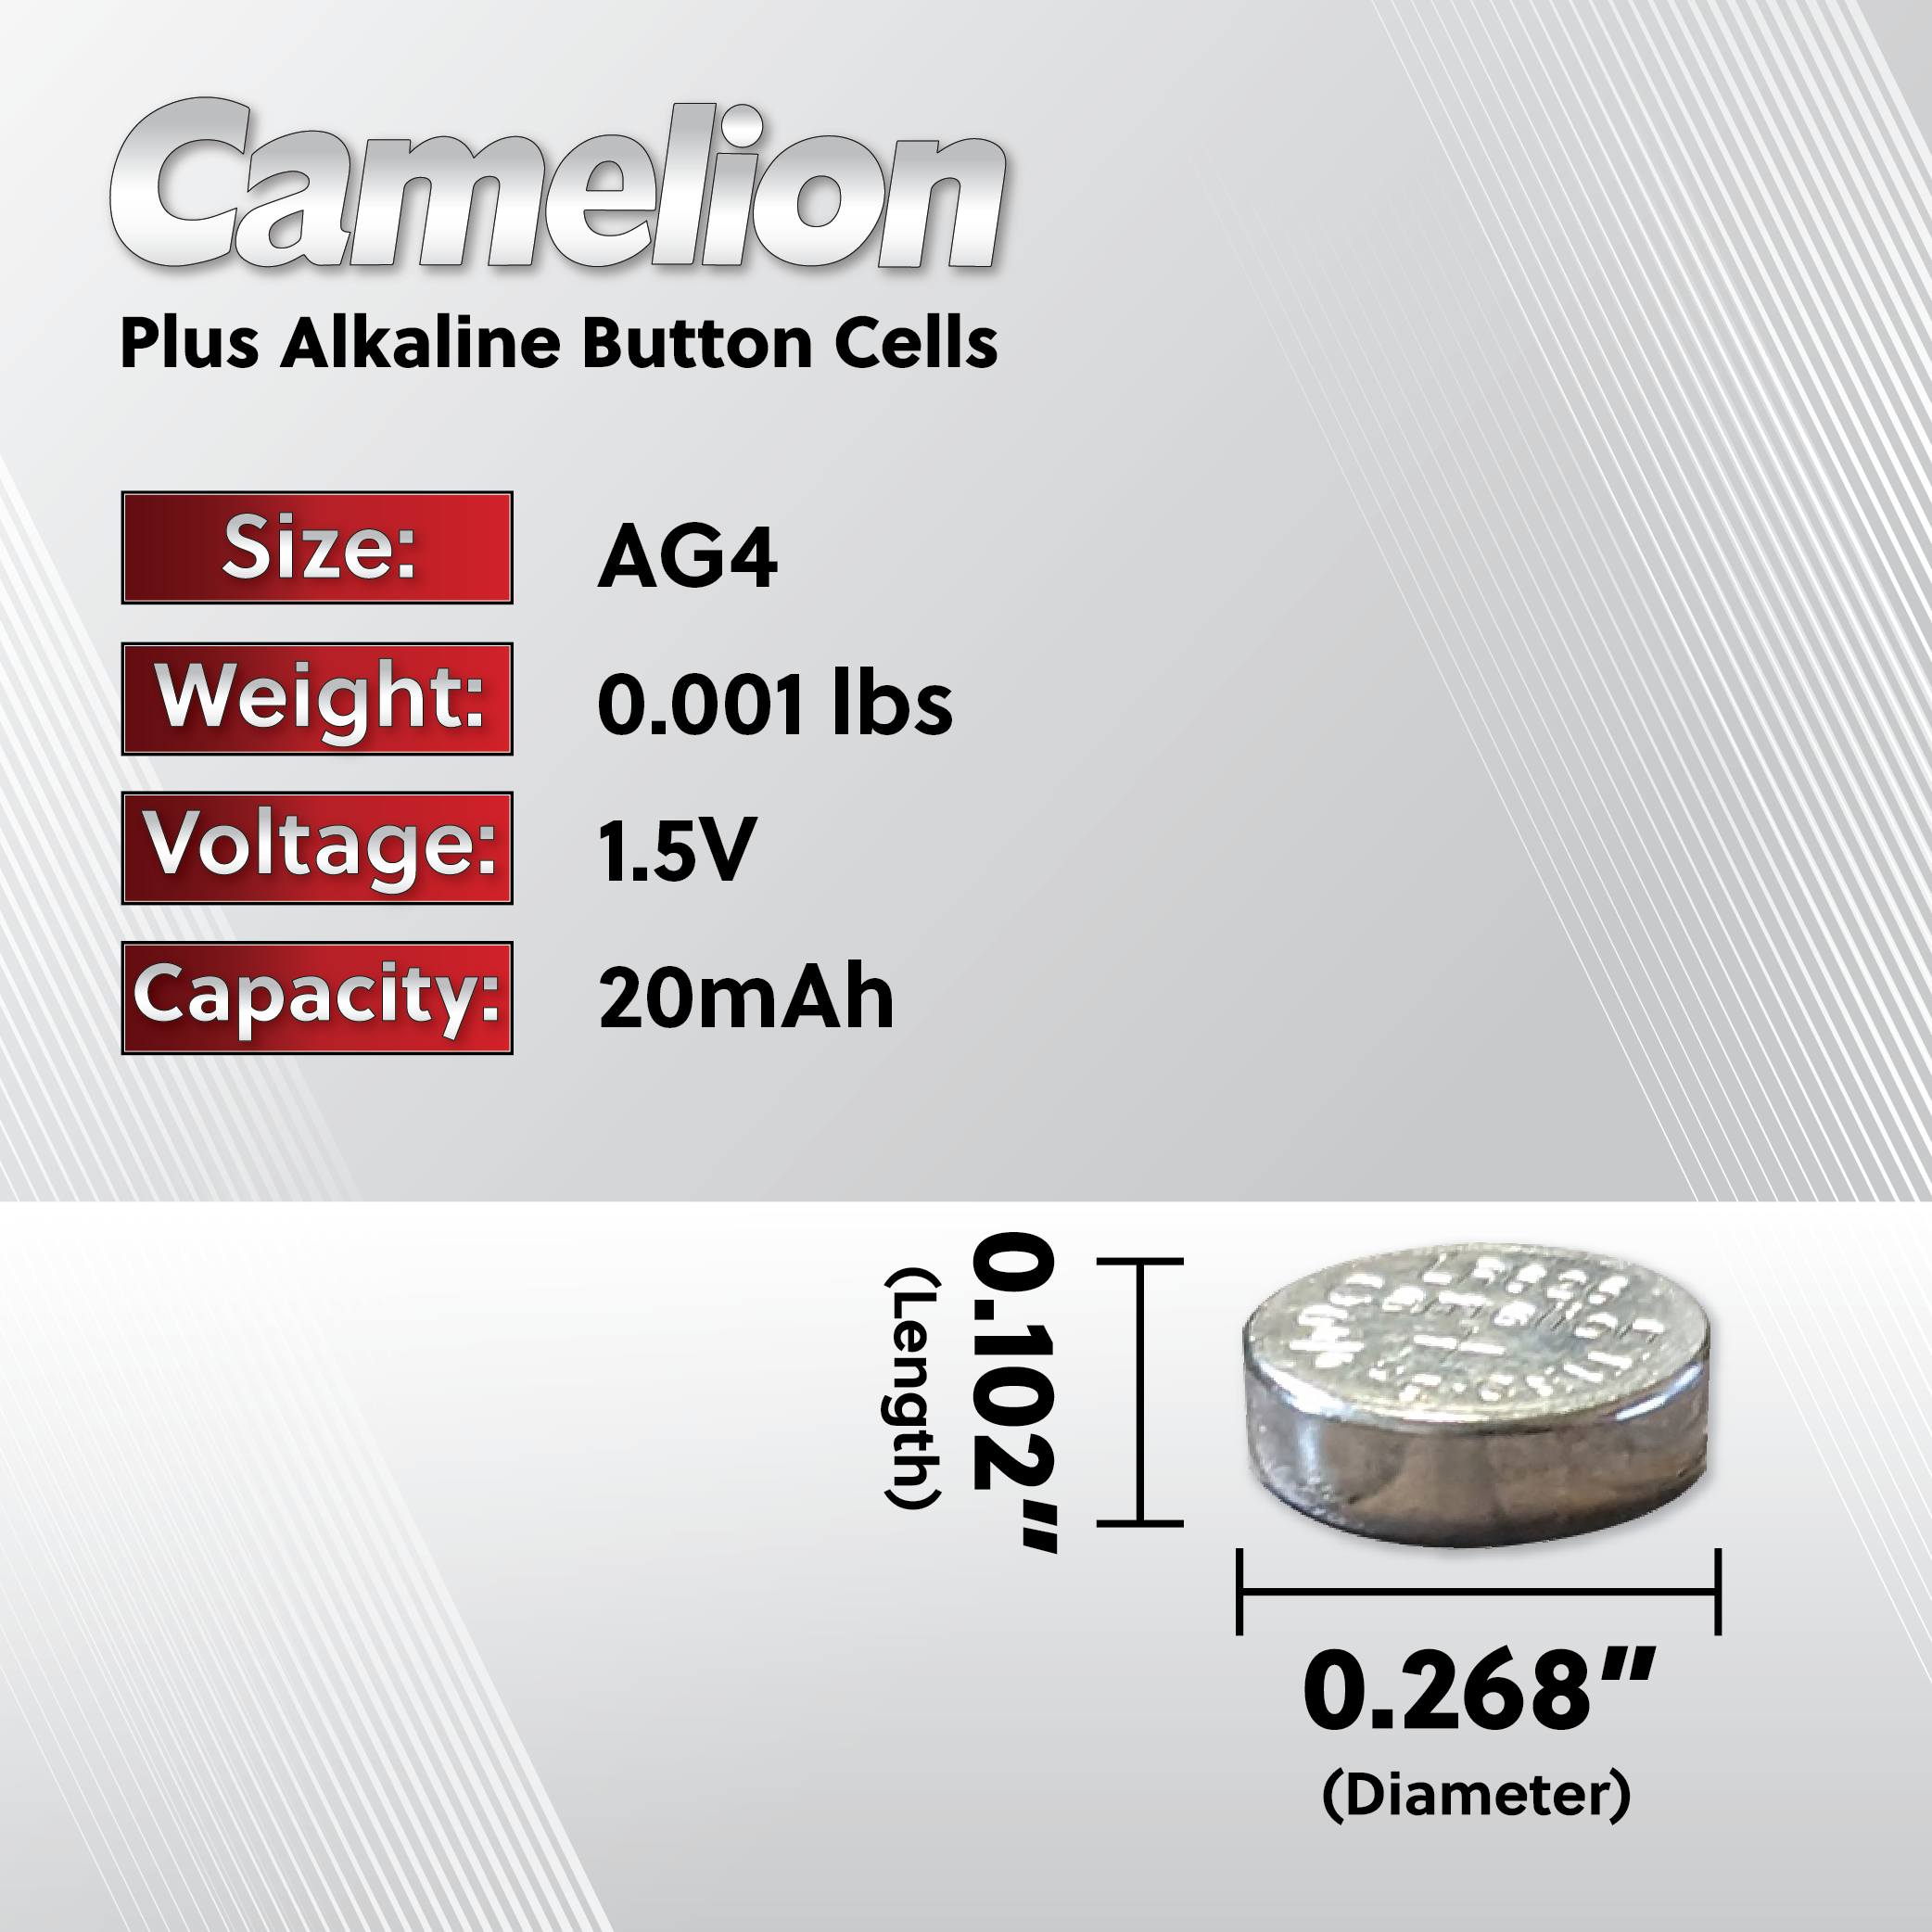 Camelion AG4 / 377 / LR626 1.5V Button Cell Battery (Two Packaging Options)